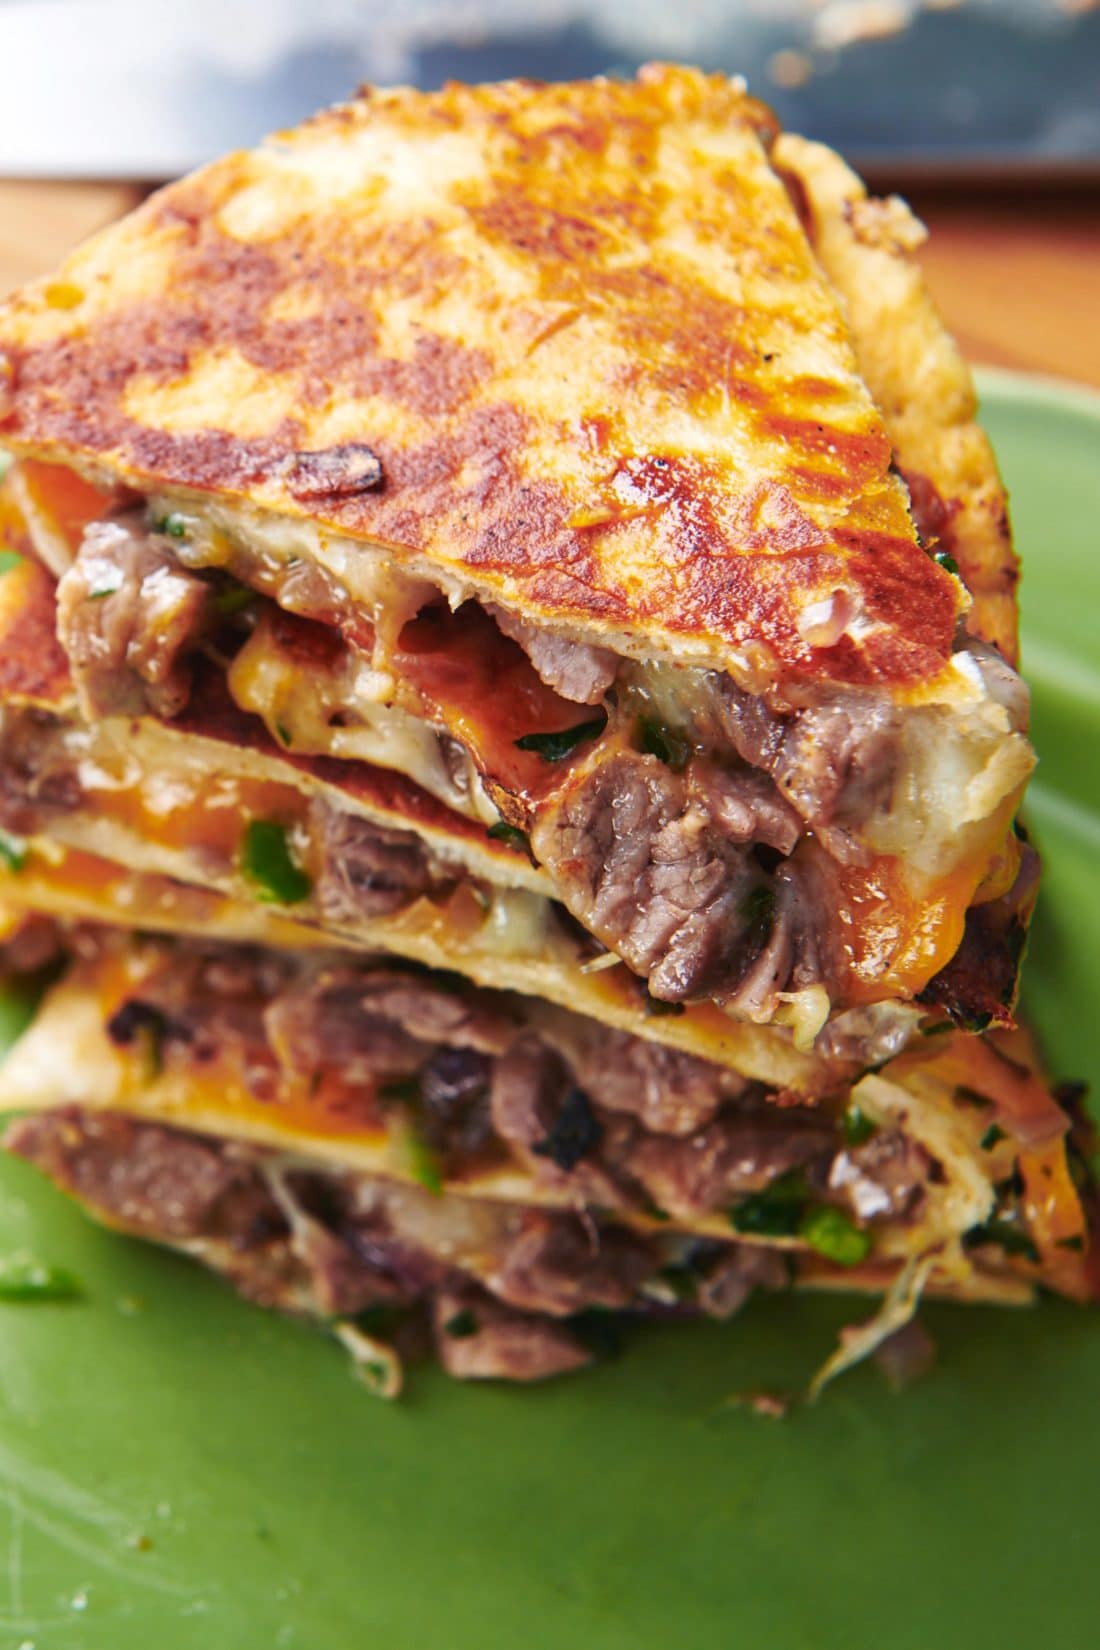 Stack of Steak and Cheese Quesadillas.